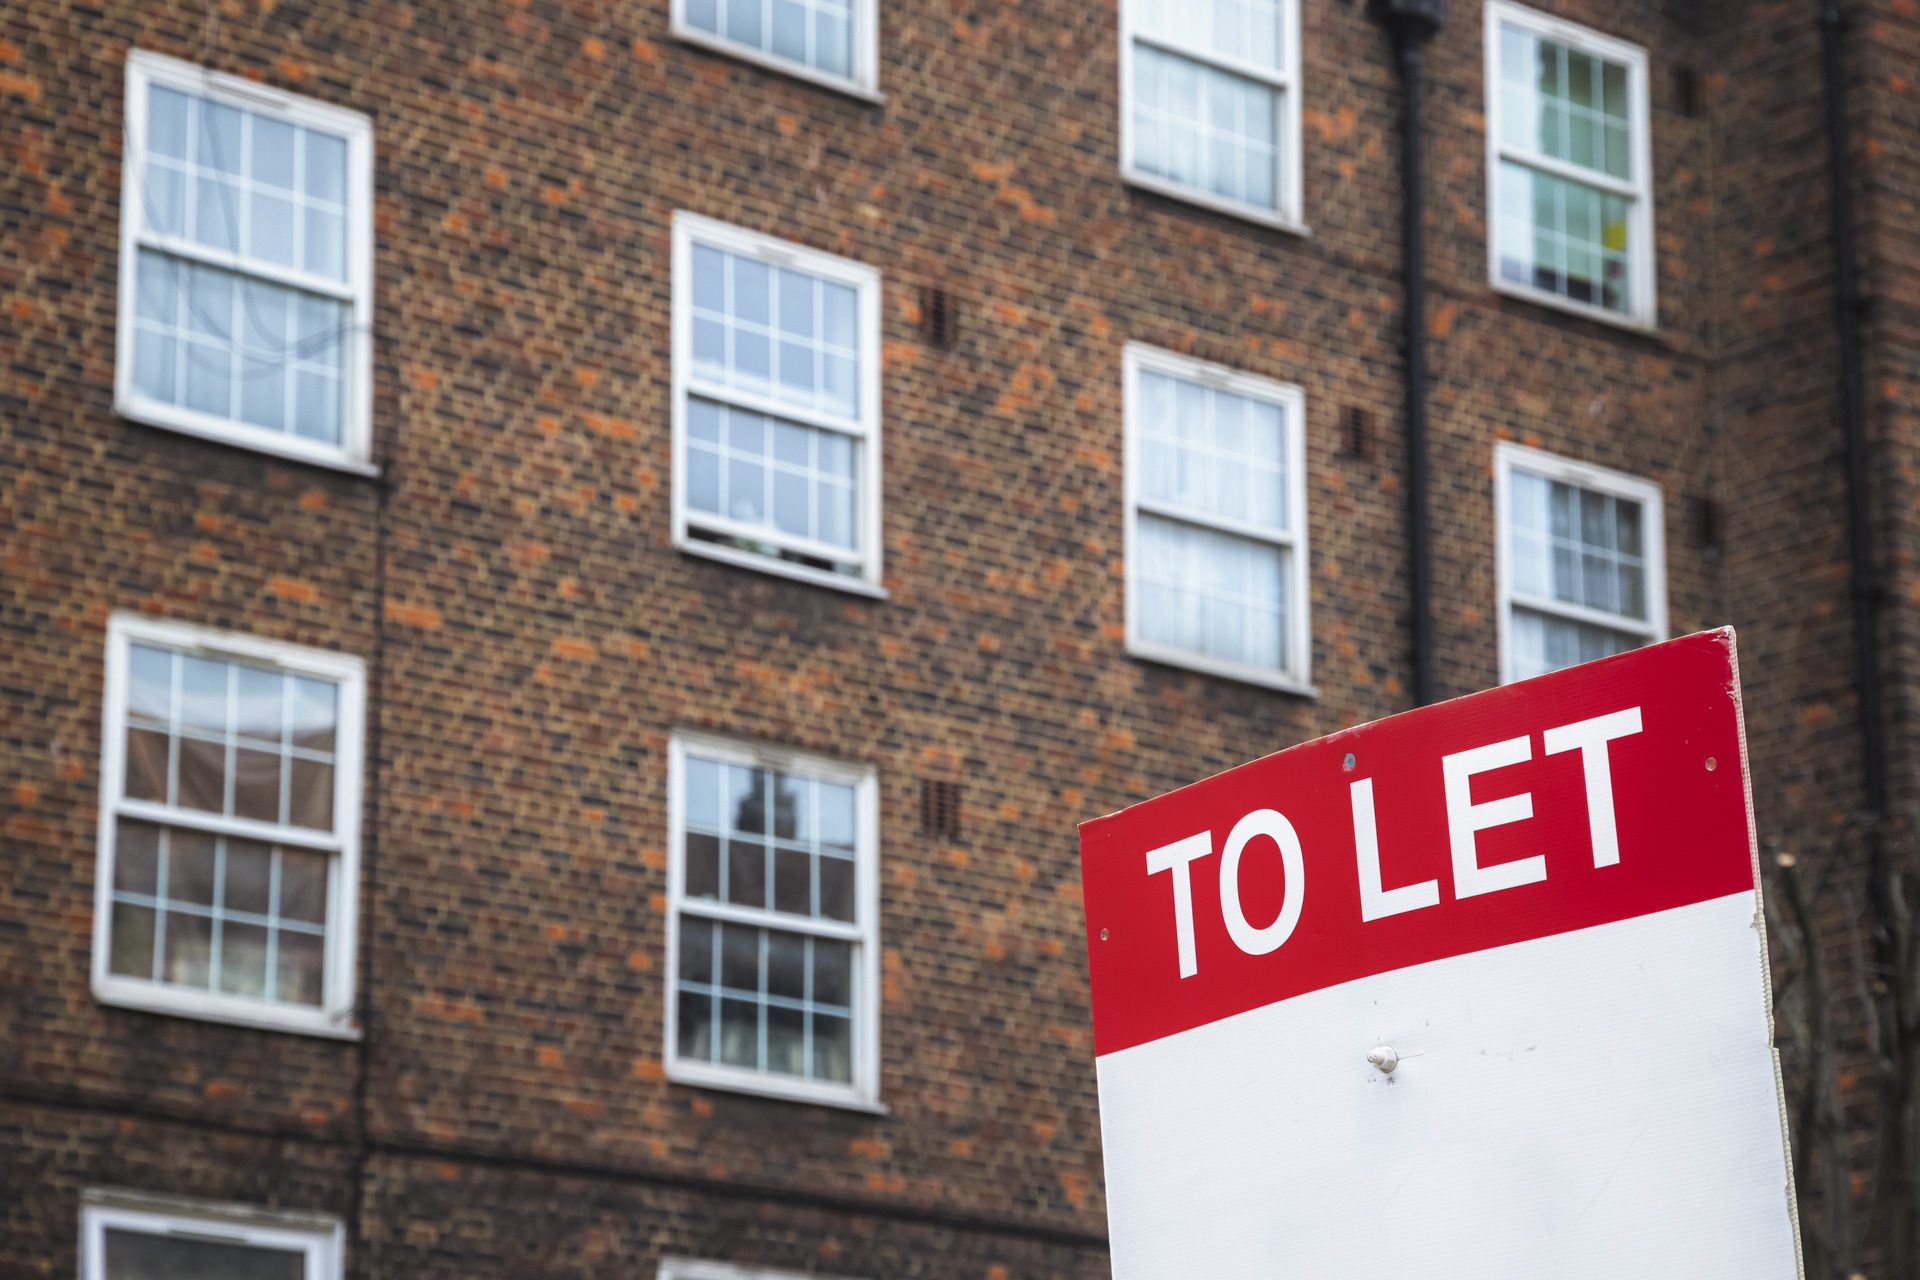 To Let sign with council housing flats in the background in south London